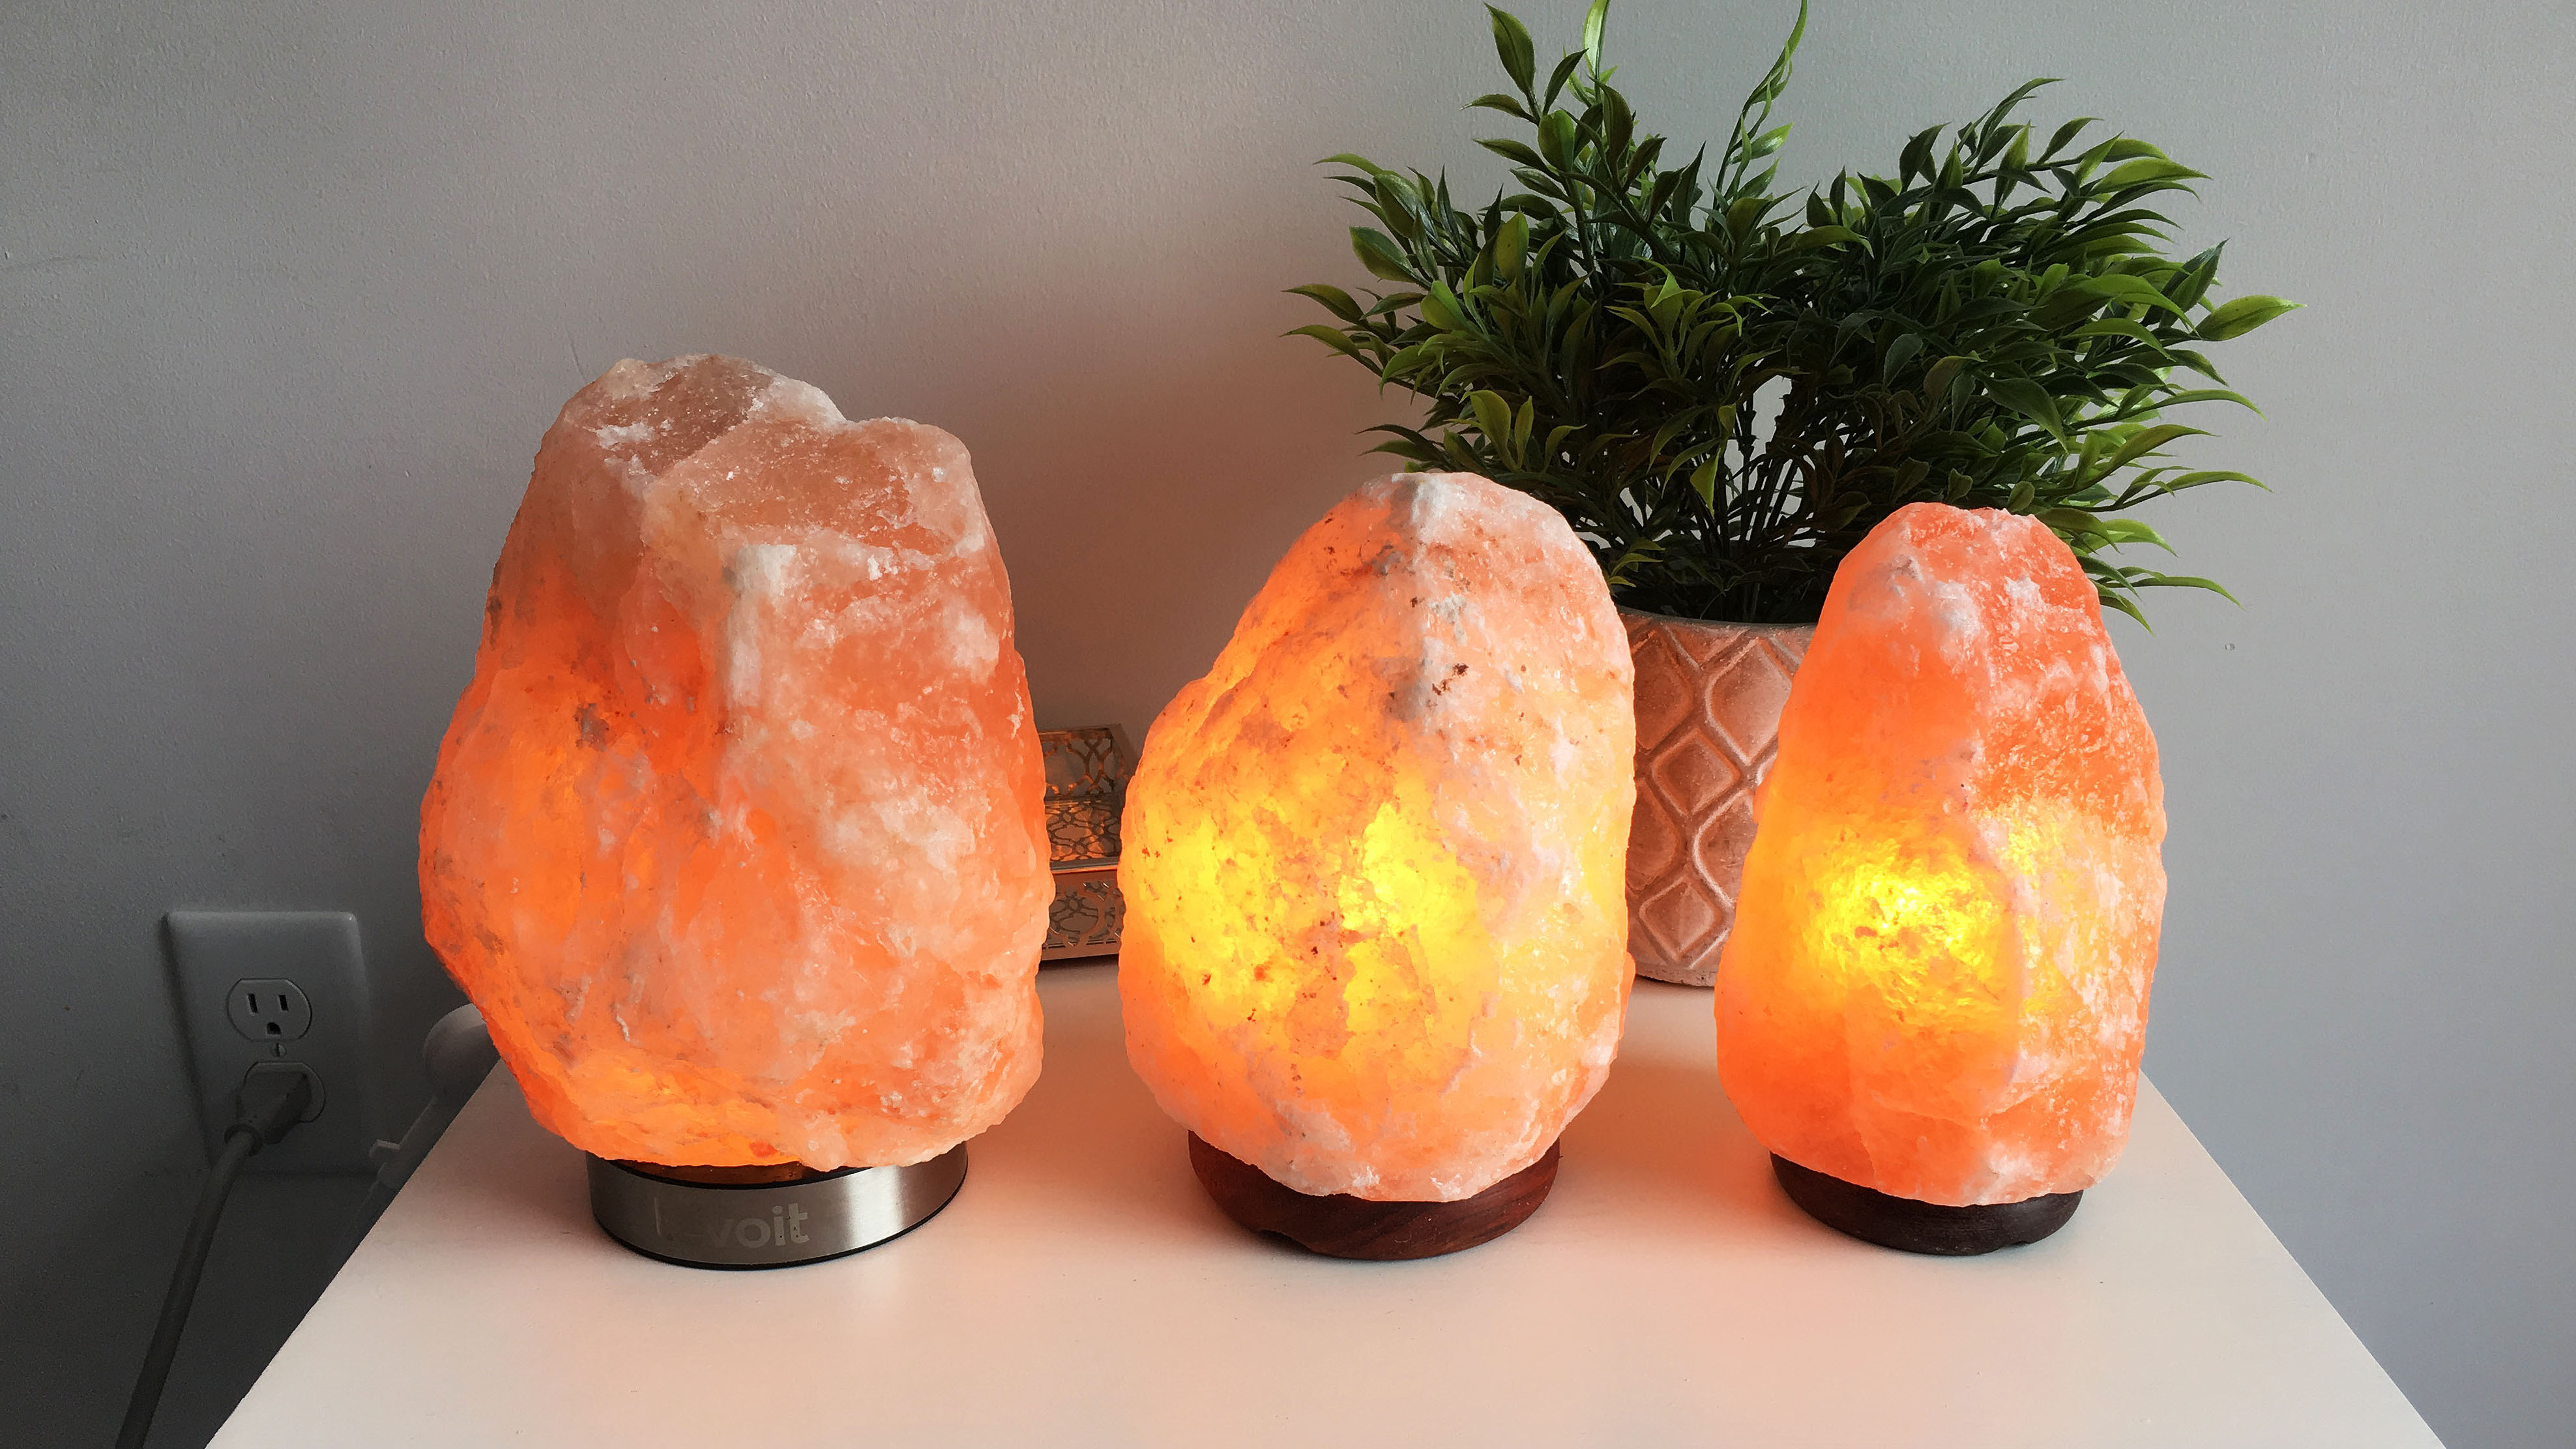 3KG Klass Home Finest Quality 100% Natural Himalayan Rock Salt LAMP Warm Pink Himalayan CAT Salt Lamp with CE Certified Dimmer Cable & 2 x Bulbs by Klass Home Collection® CAT with Dimmer Cable